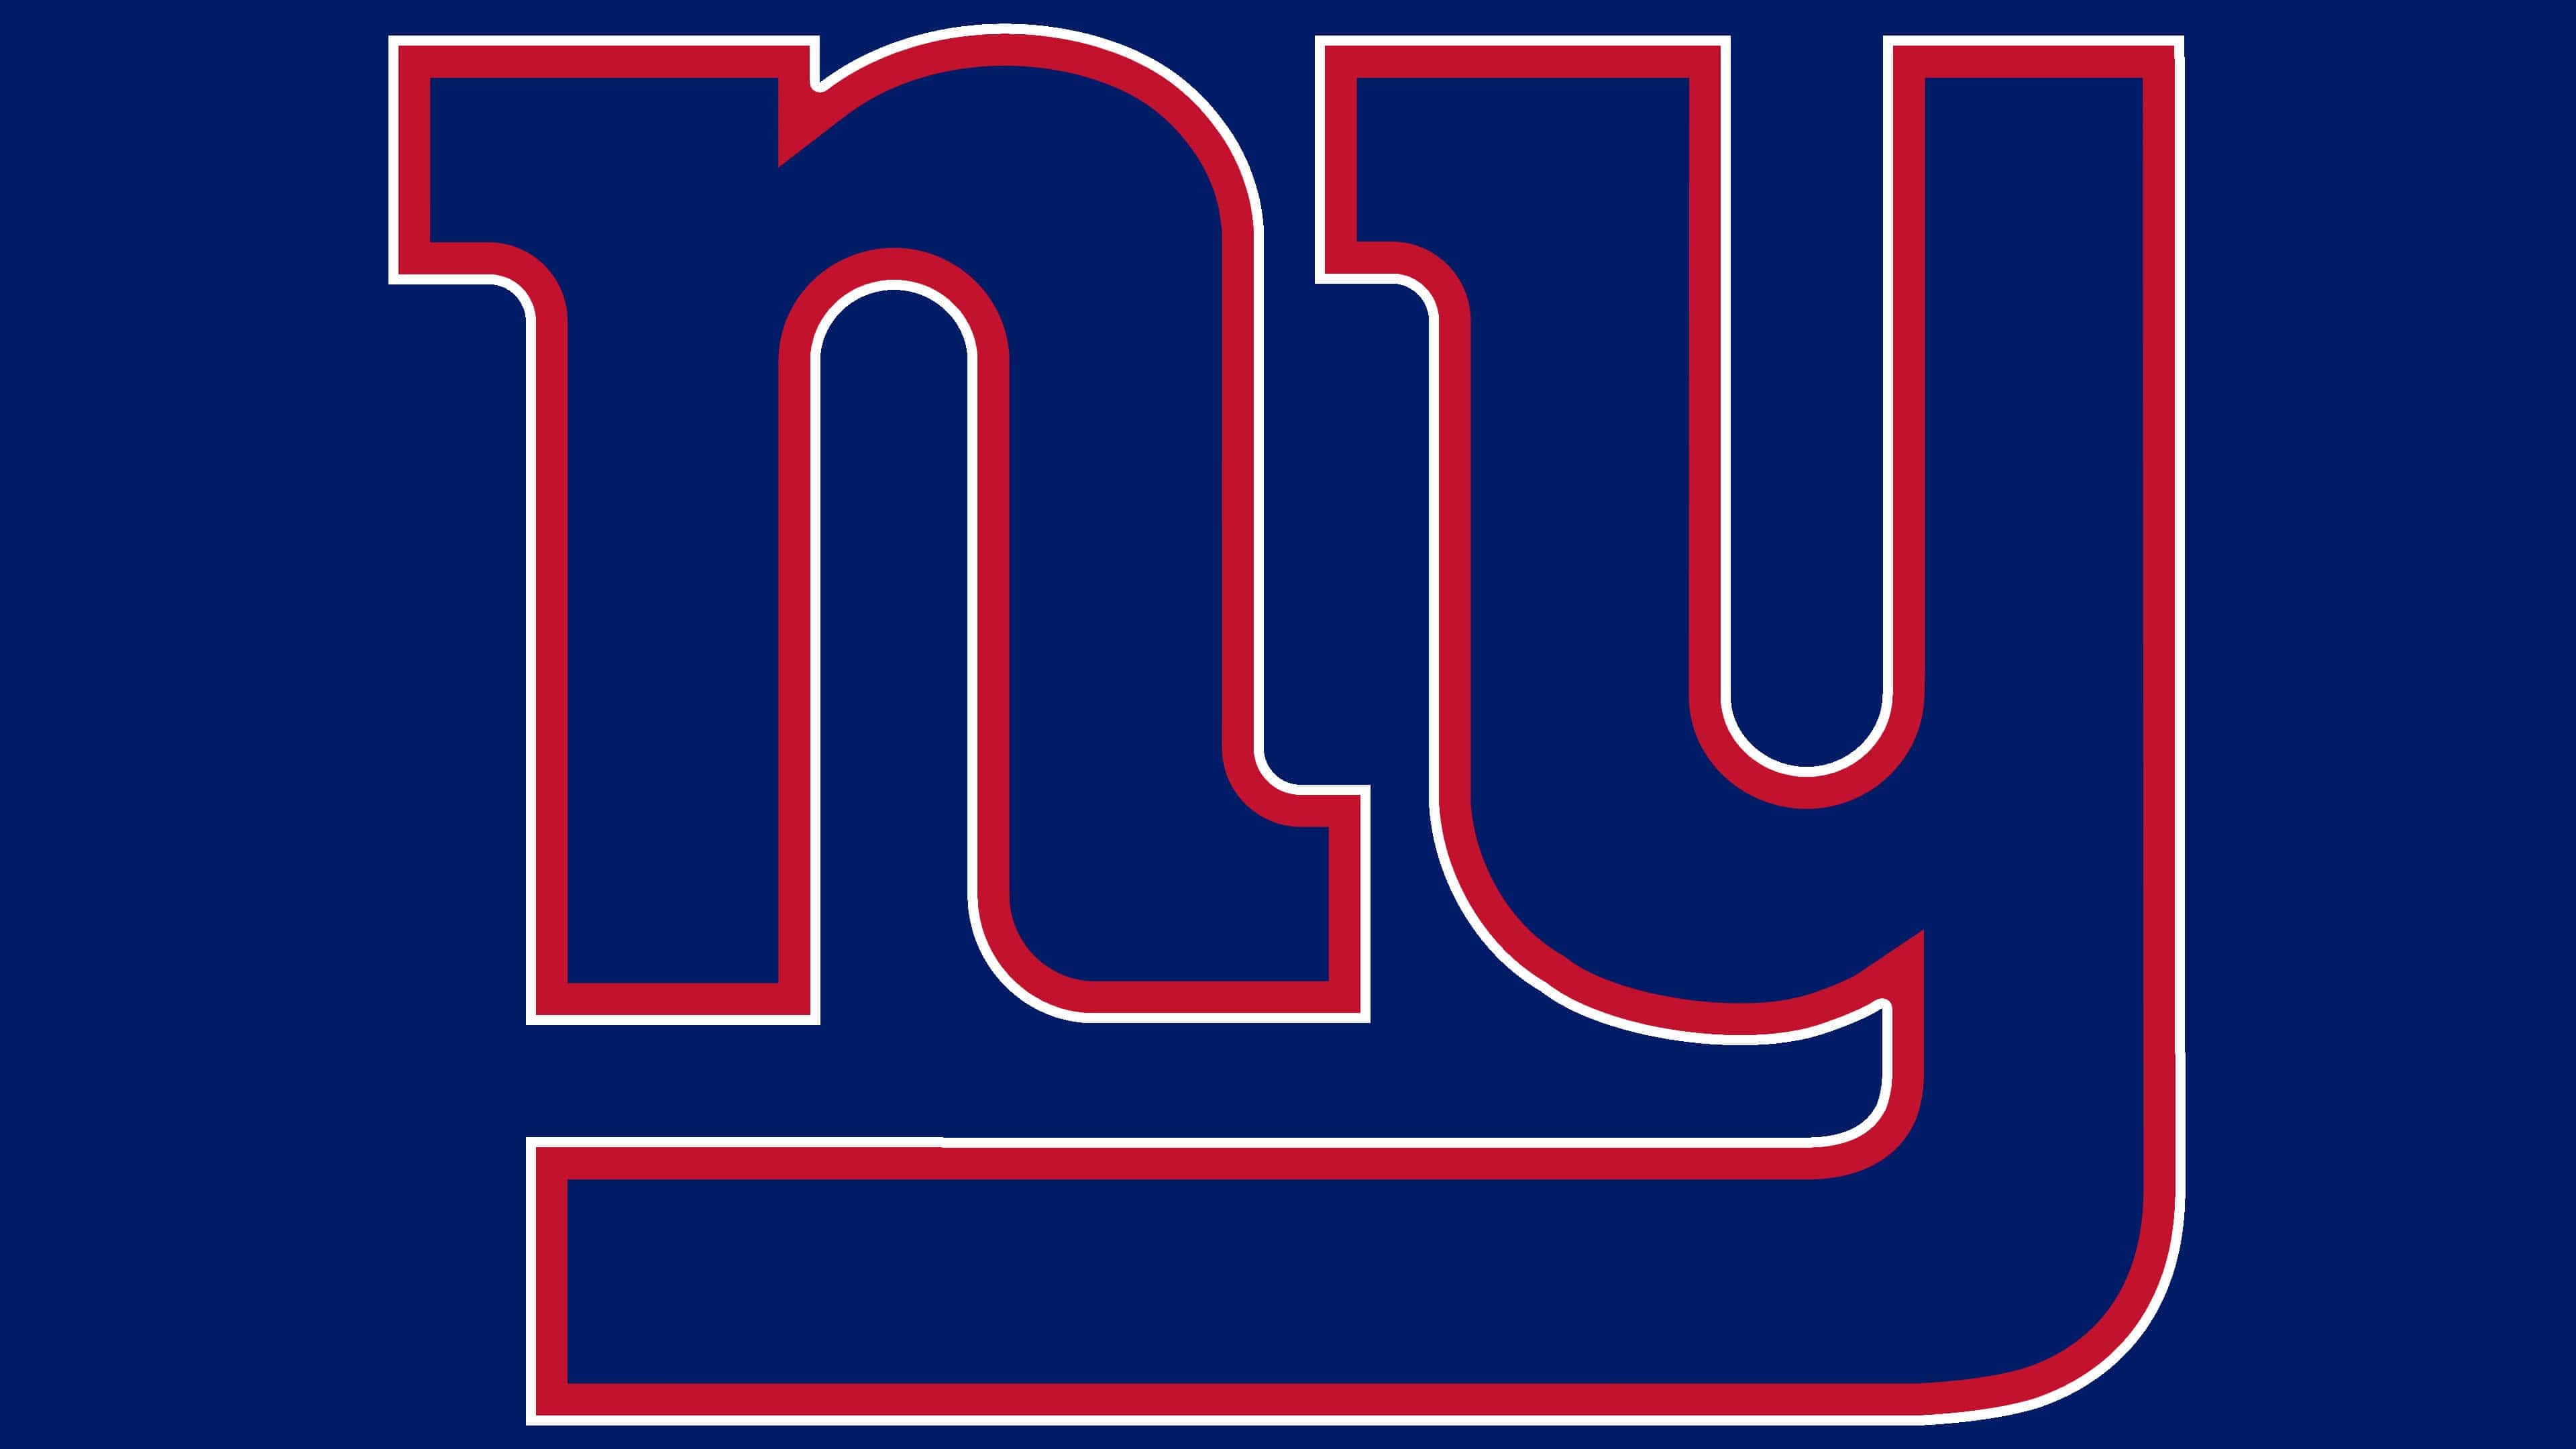 Logos and uniforms of the New York Giants - Wikipedia